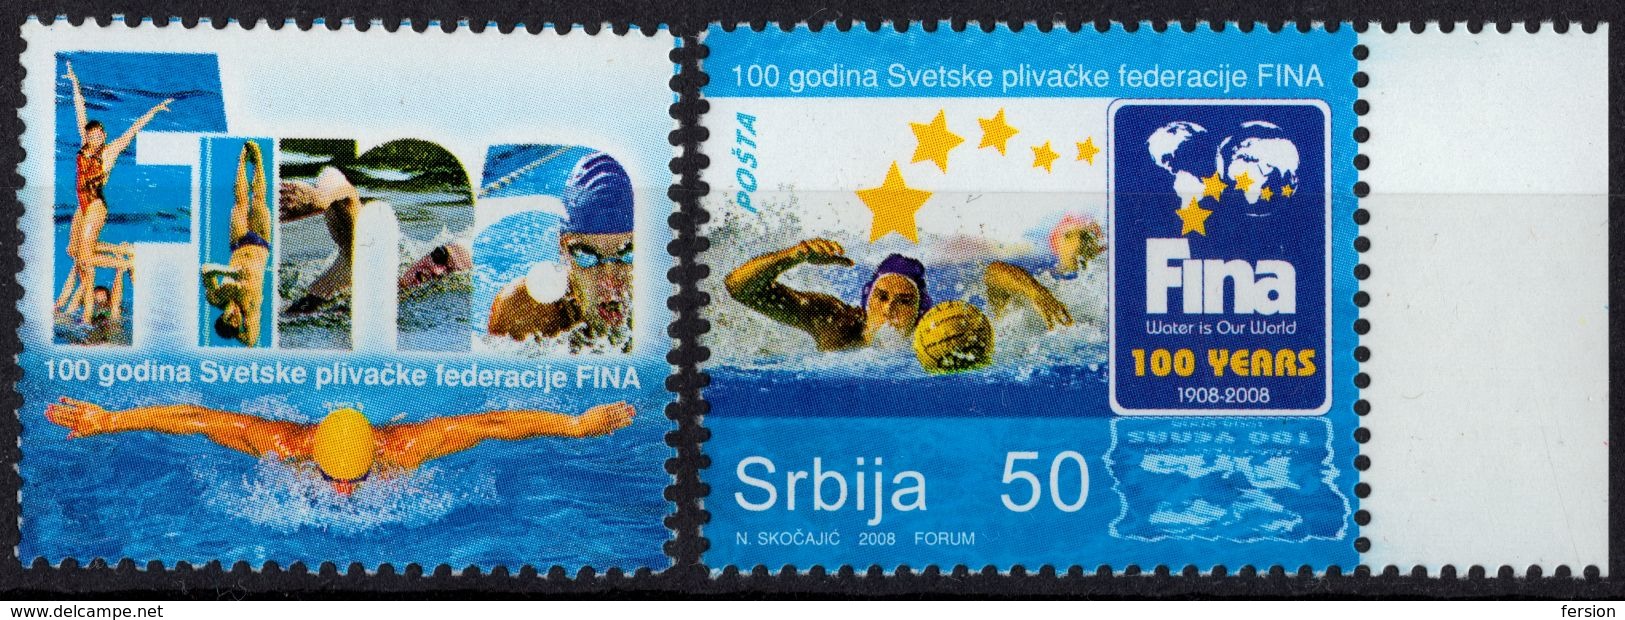 2008 - SERBIA - WATER POLO Ball Swimming - 100th Anniv. Of FINA - MNH  / With LABEL CINDERELLA VIGNETTE - Water-Polo